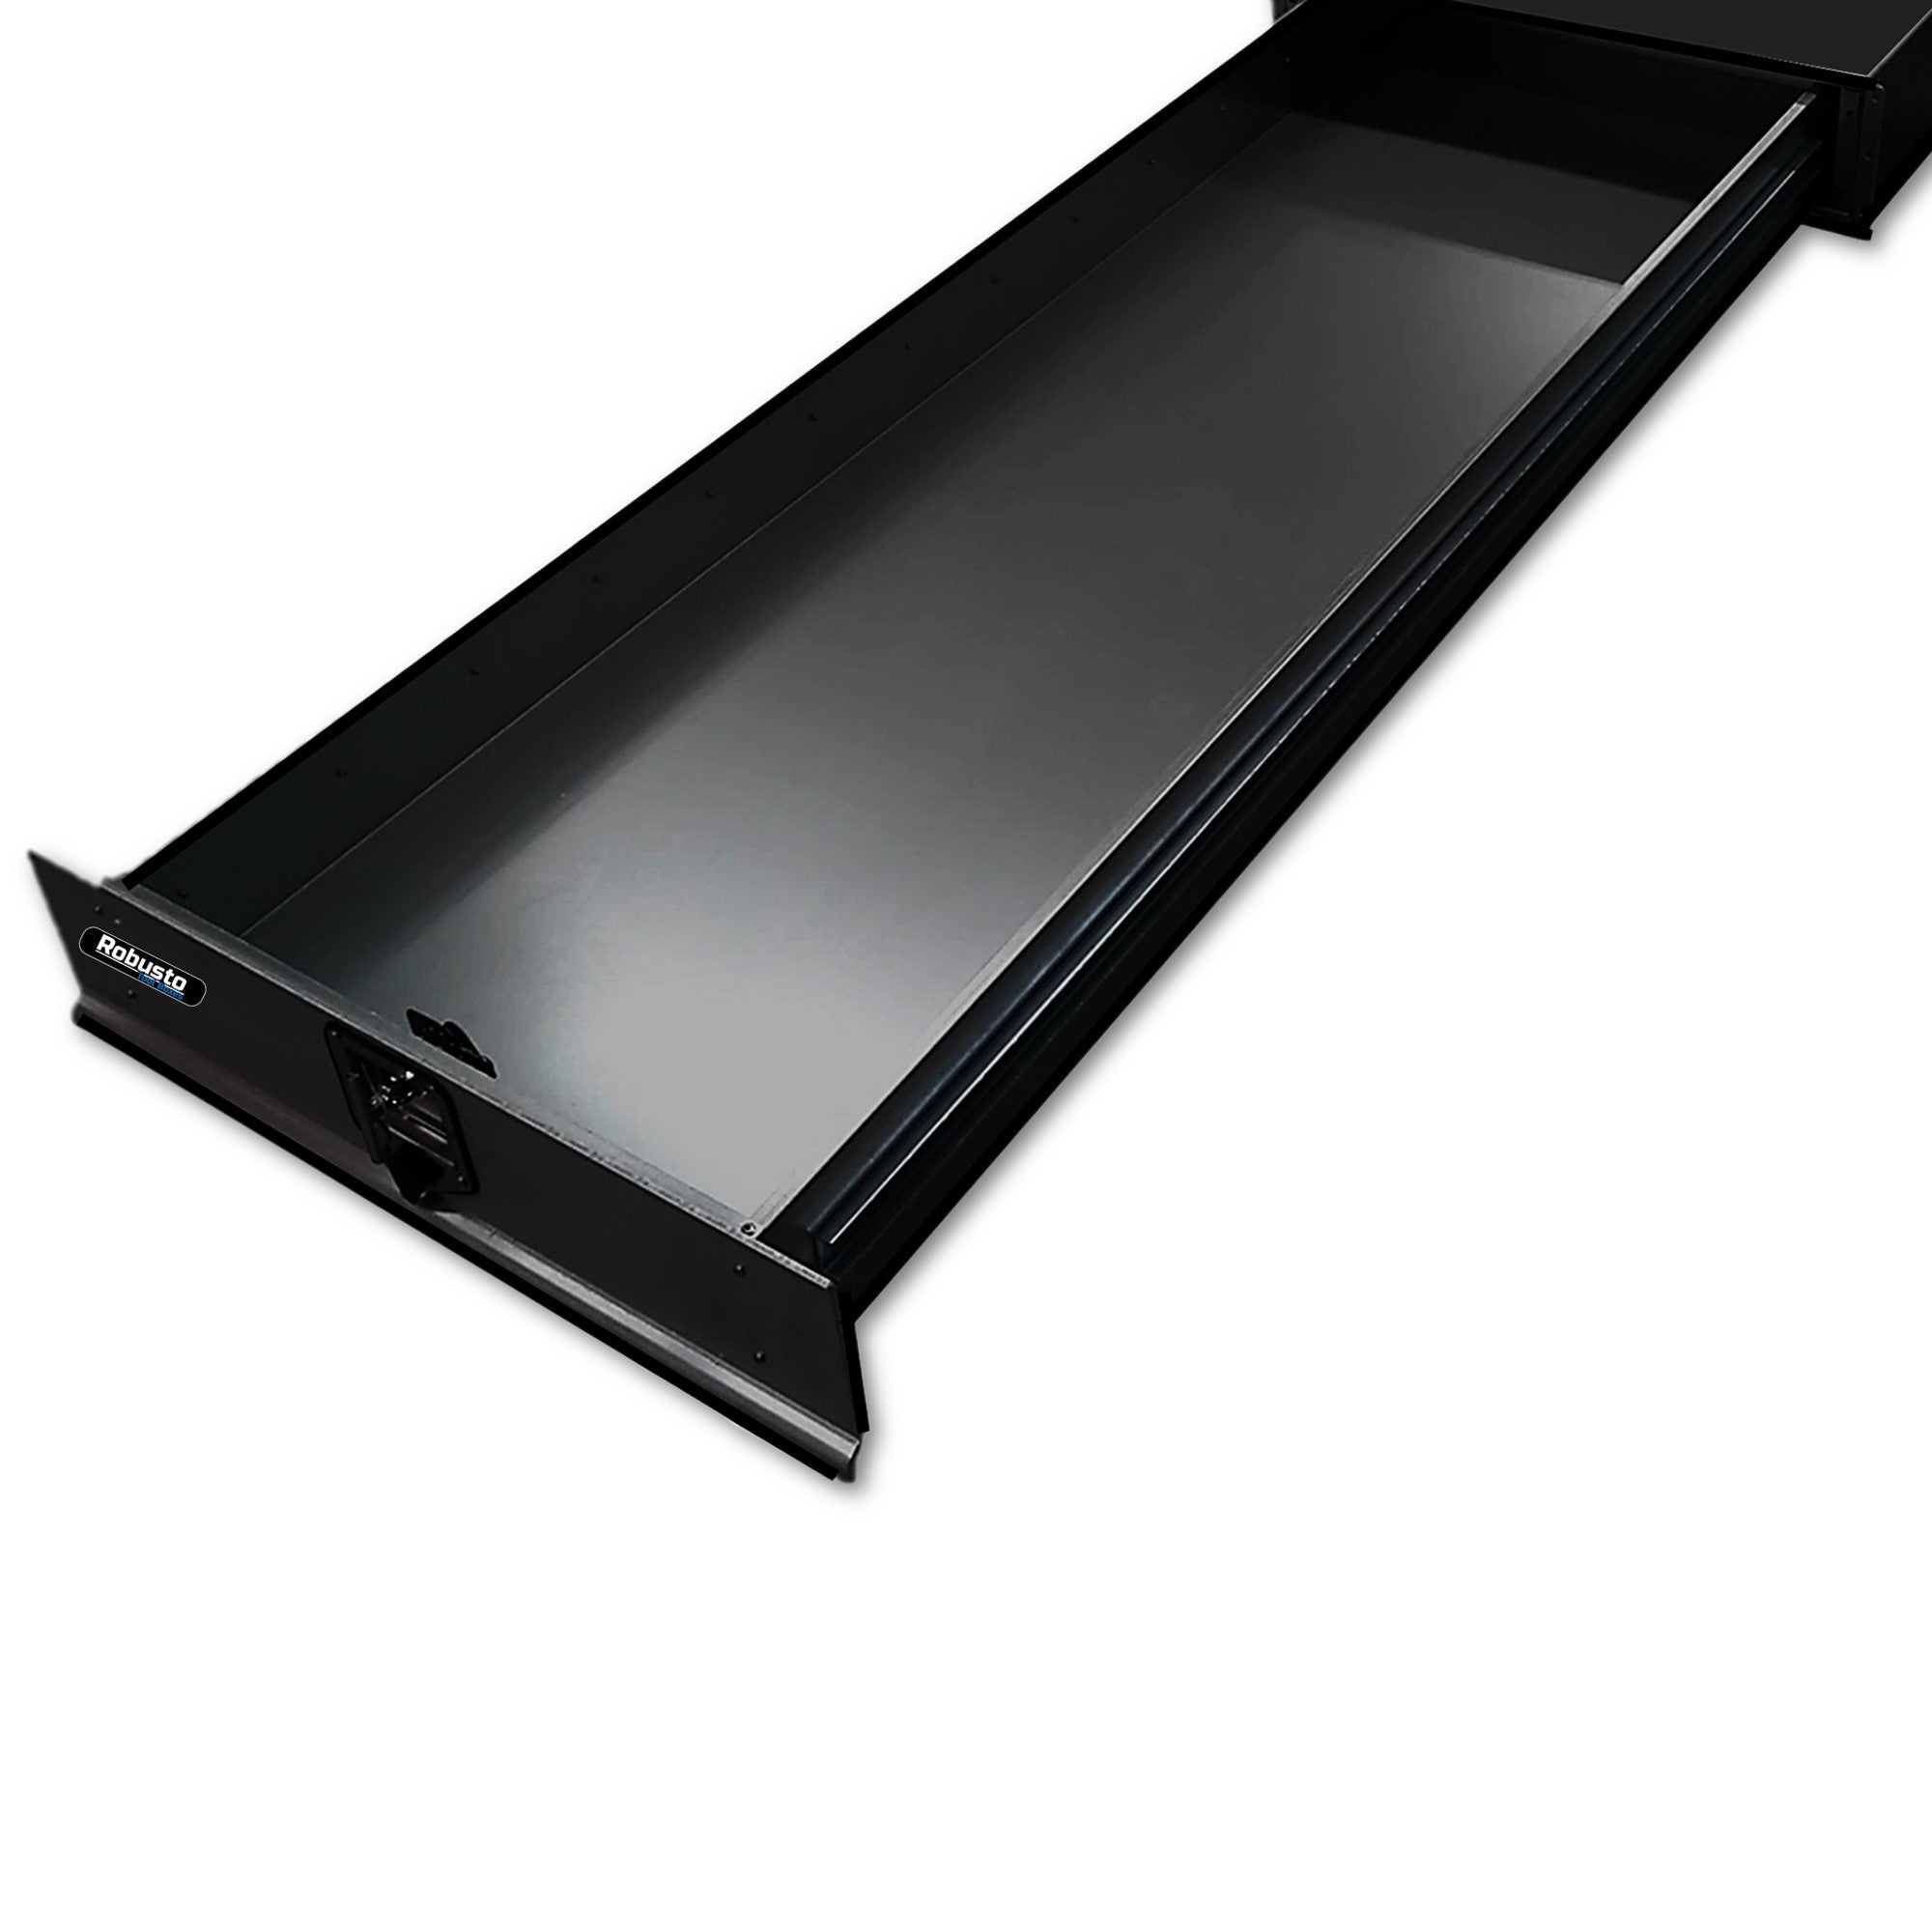 Under Tray Tool Box Trundle Drawer UnderTray Drawer Steel 1500X750x170mm 